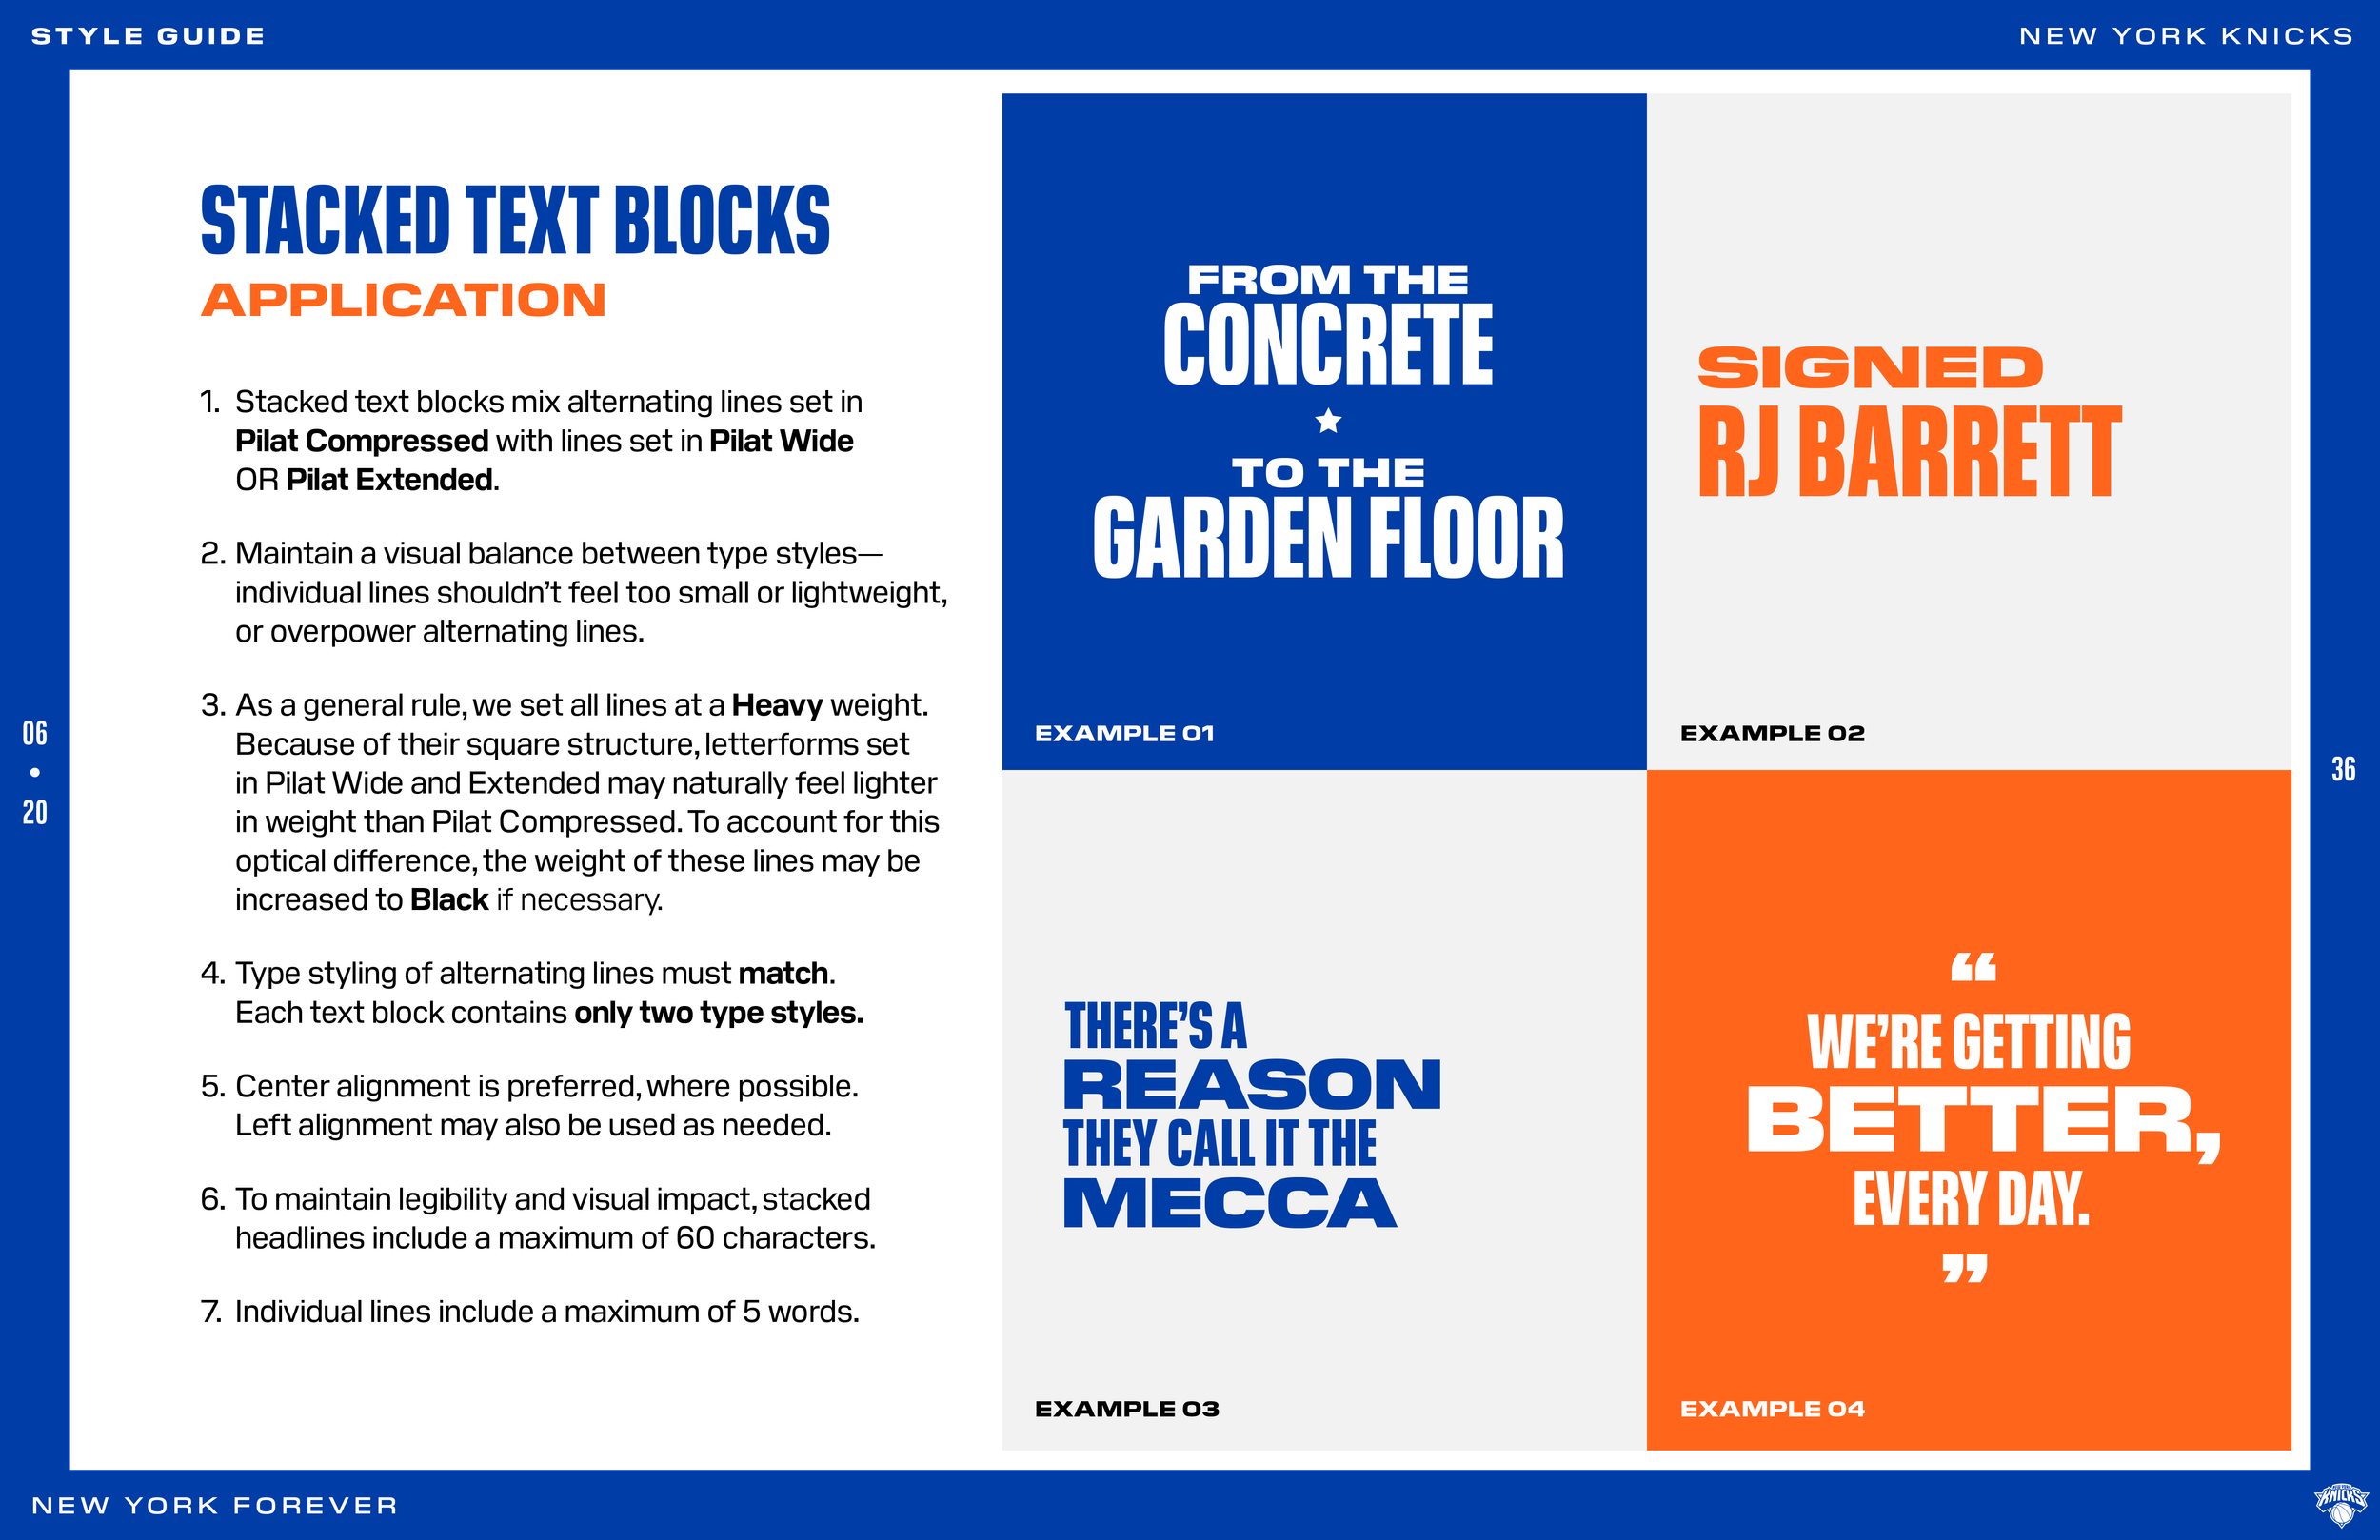 Pages from KNICKS_StyleGuide_062420 36.png